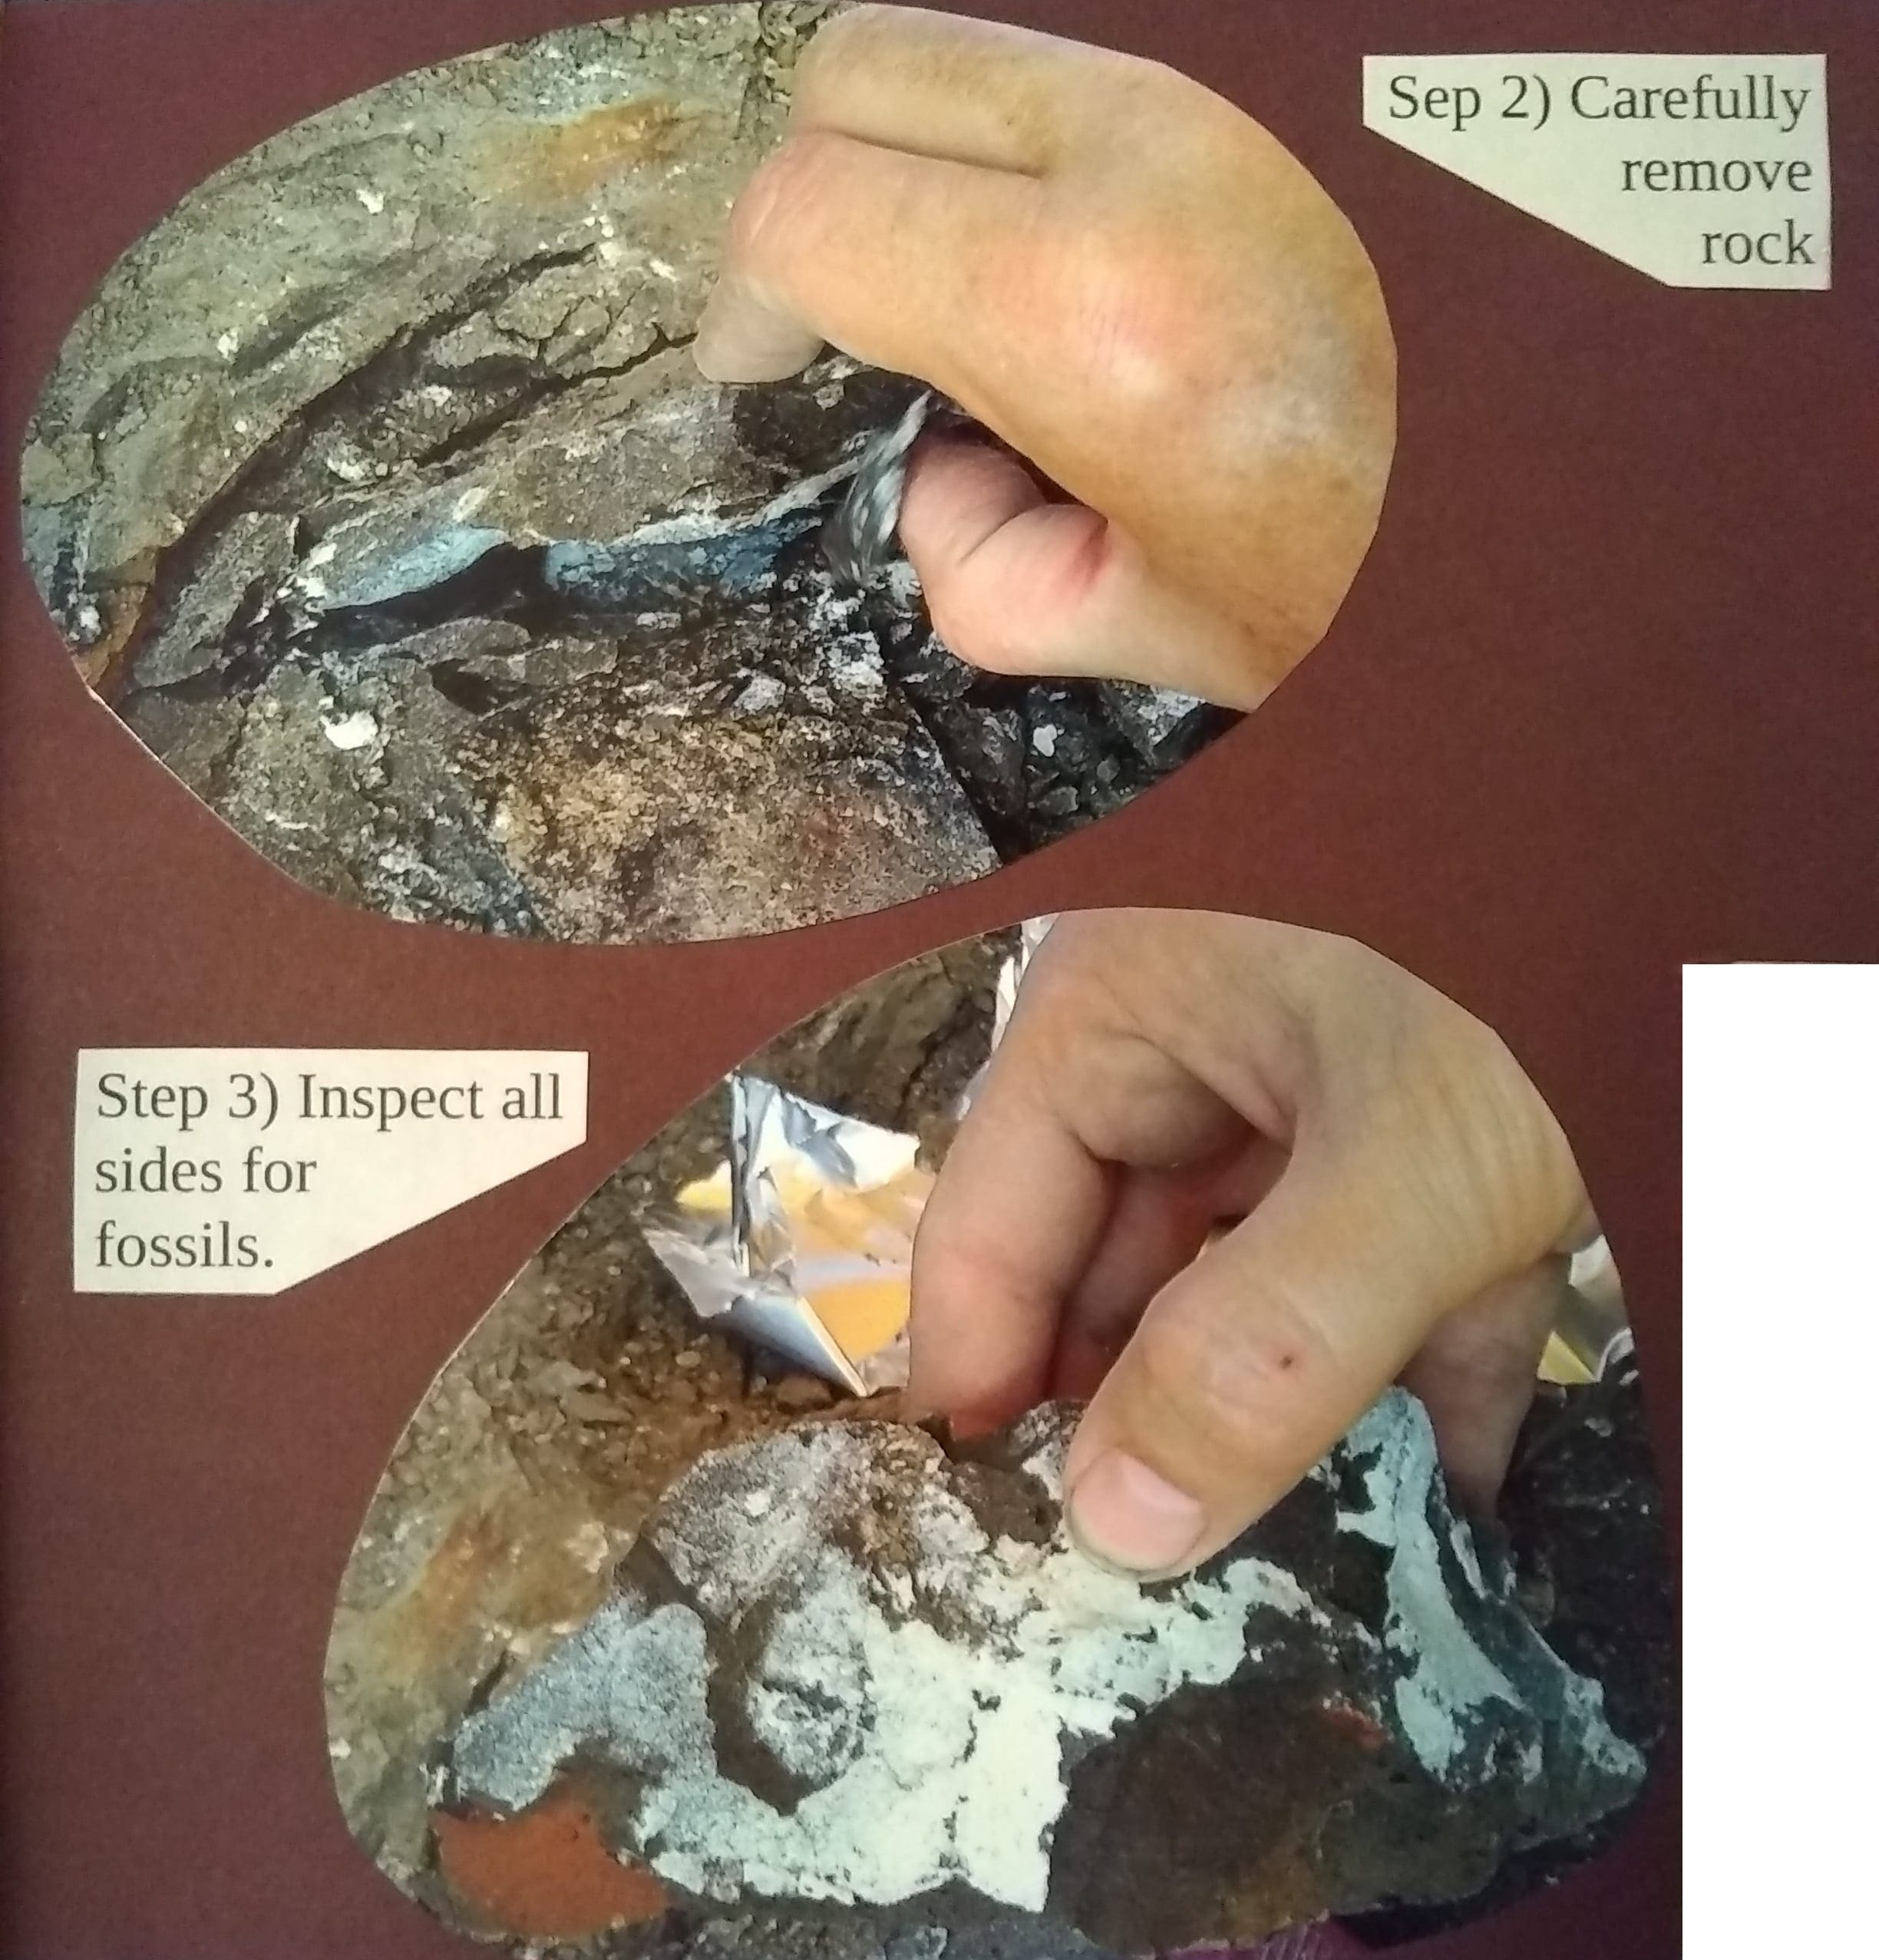 Step 2: Carefully remove rock. Step 3: Inspect all sides for fossils